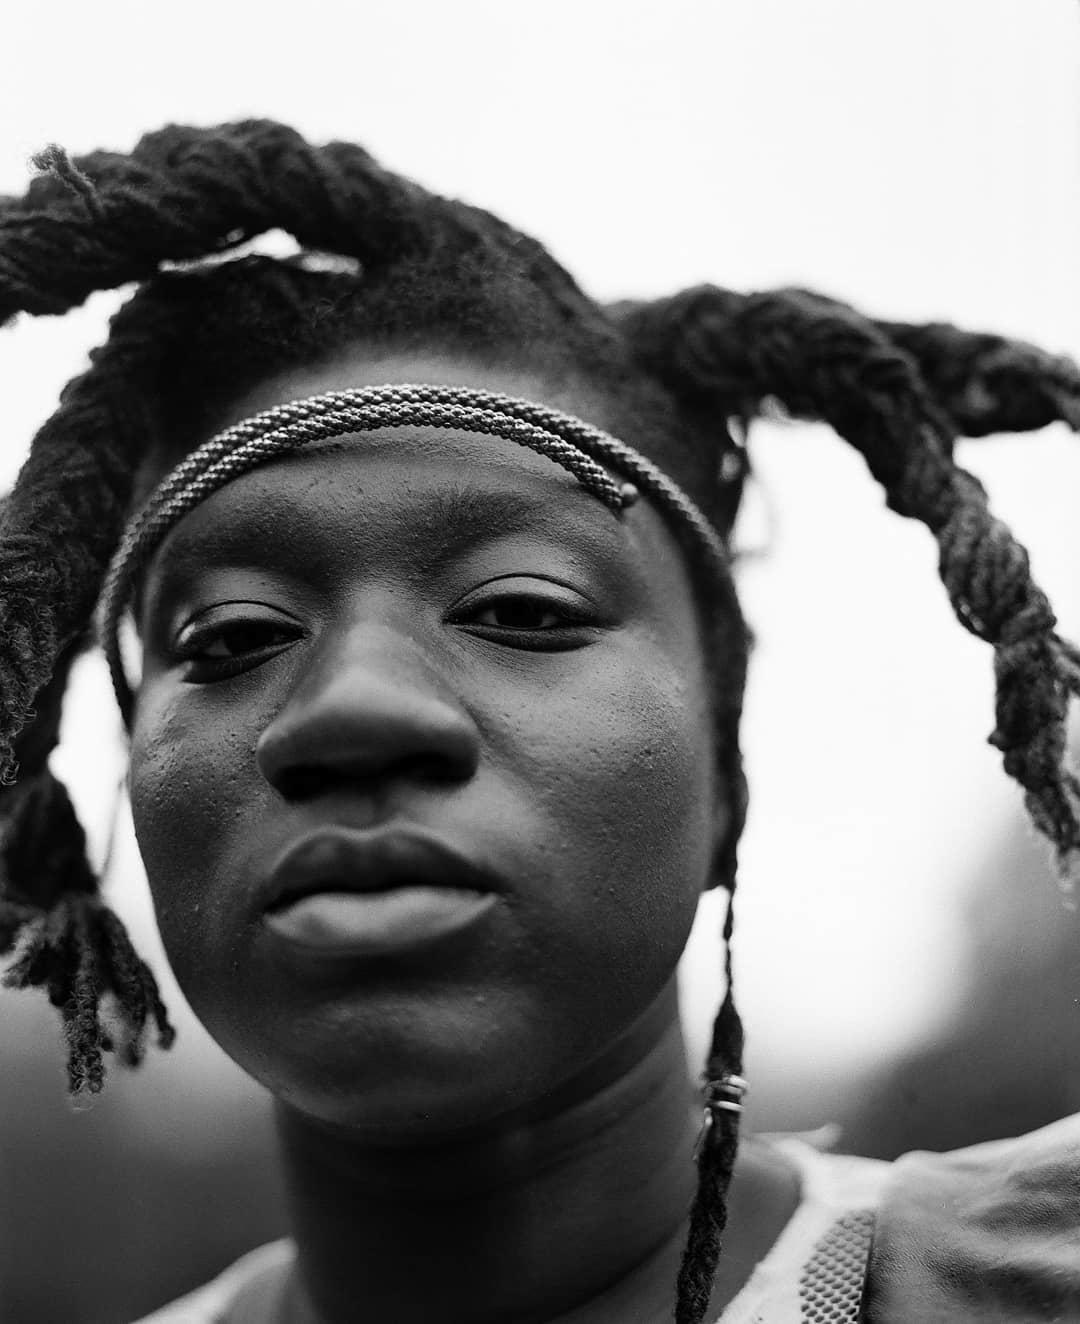 Black and white photograph of a woman with dread locks and headband